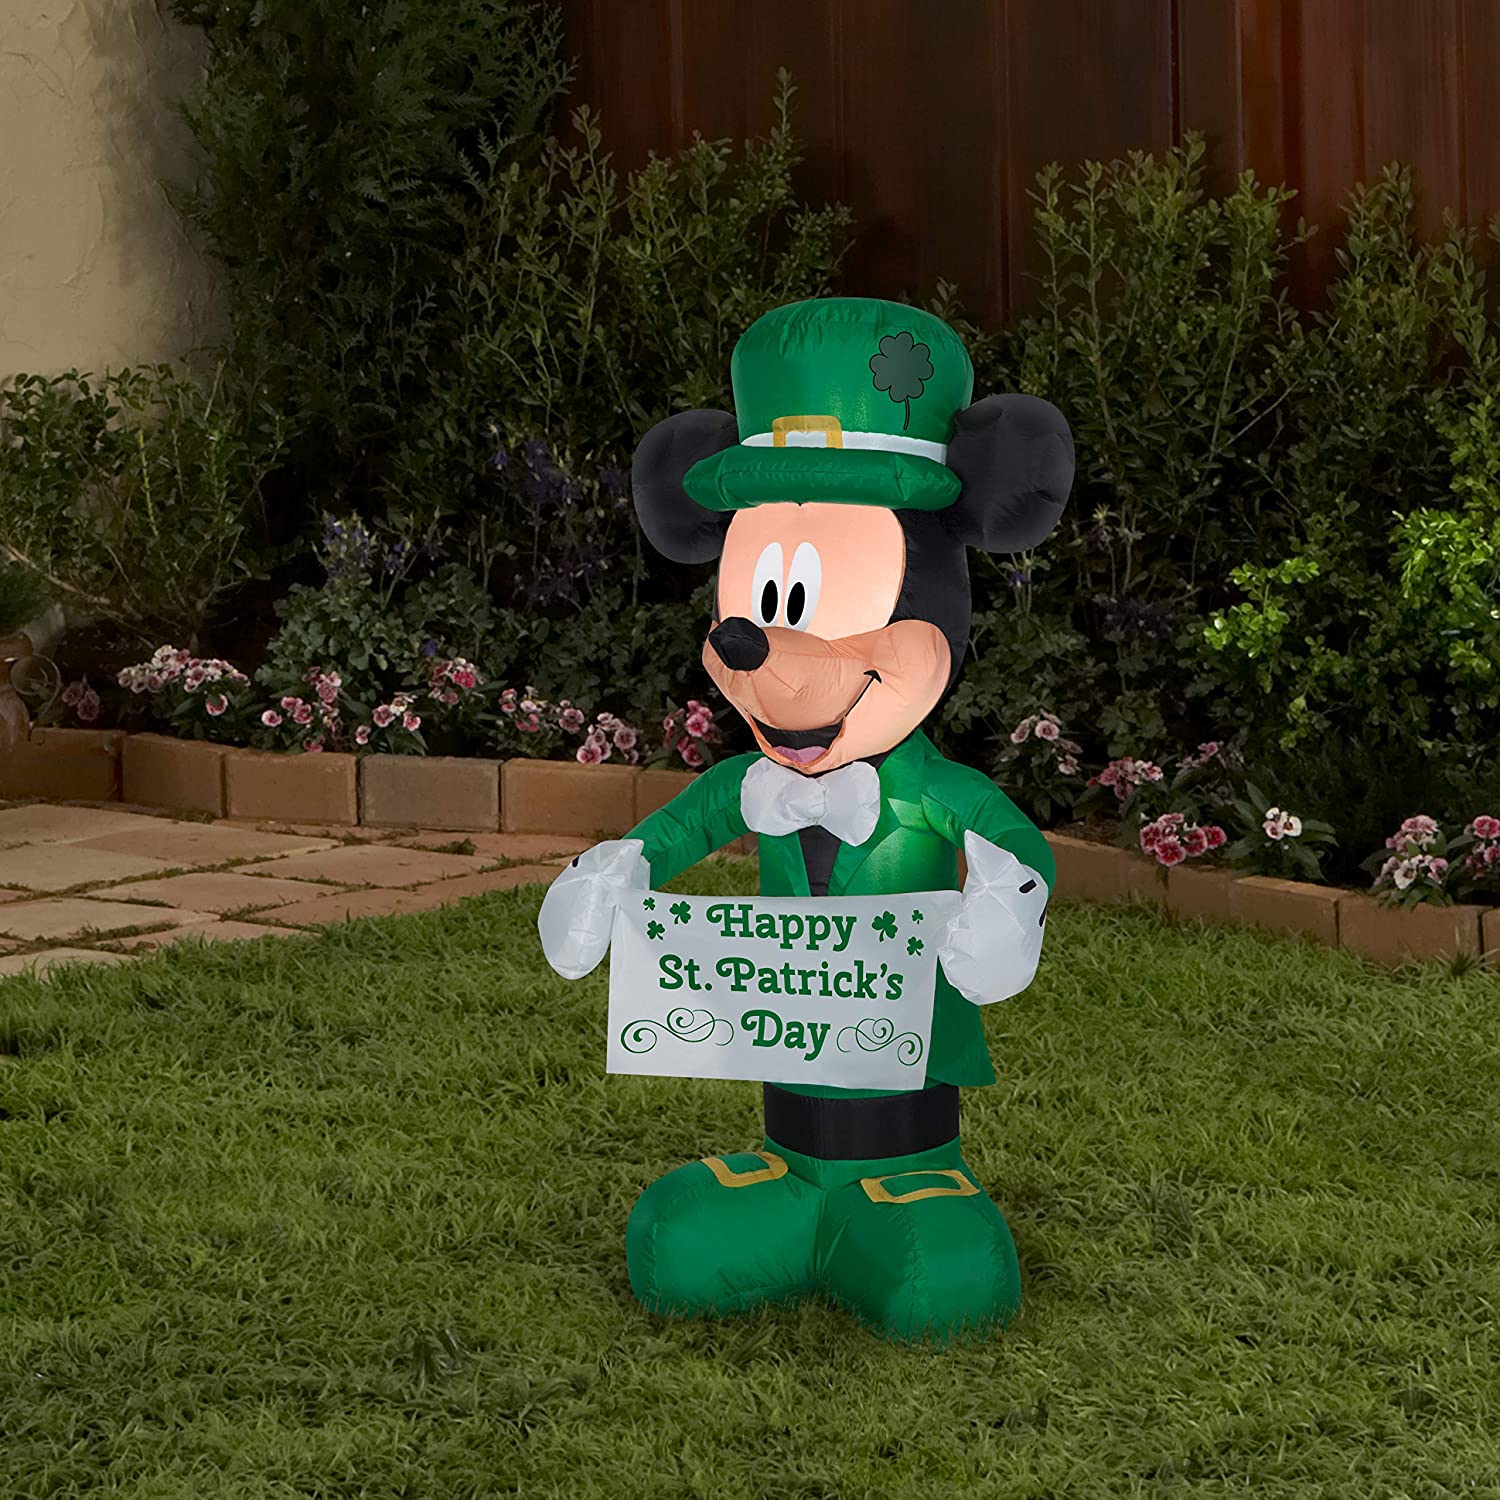 Gemmy Airblown Inflatable St. Patrick's Day Mickey Mouse, 3.5 ft Tall, Green, Patio, Lawn & Garden